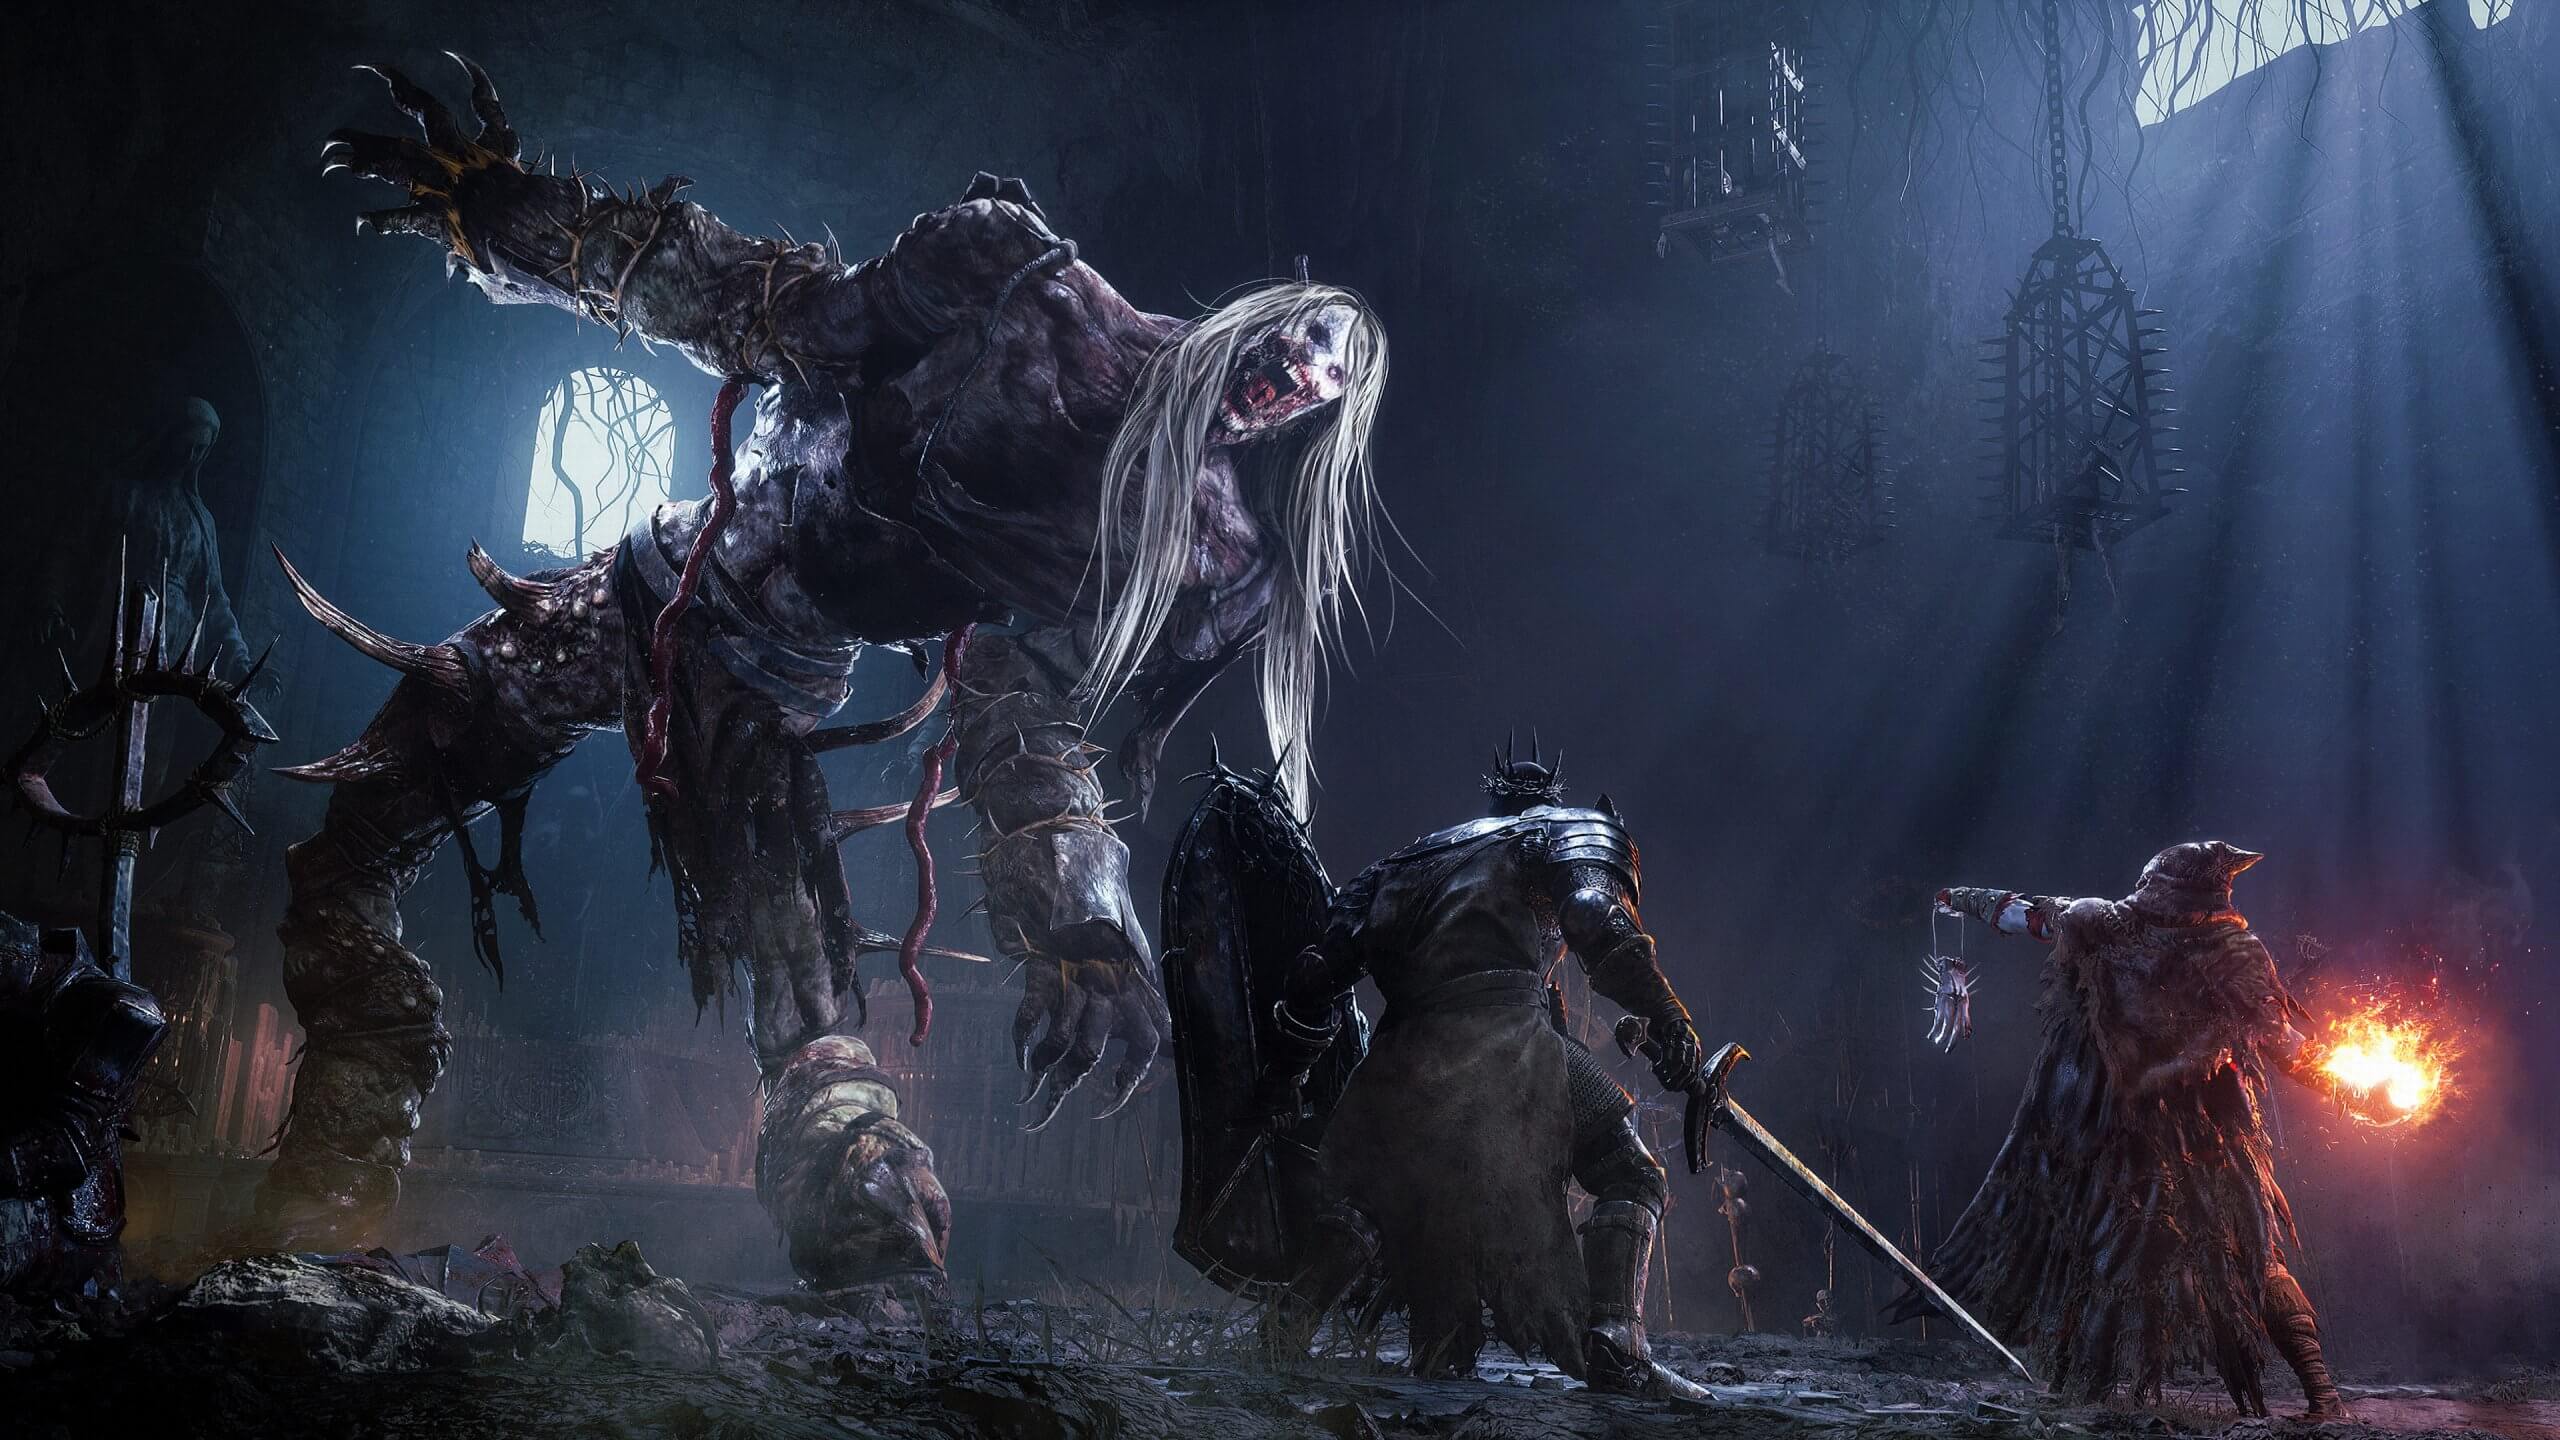 Lords of the Fallen Update 1.1.203 Patch Notes: Bug…